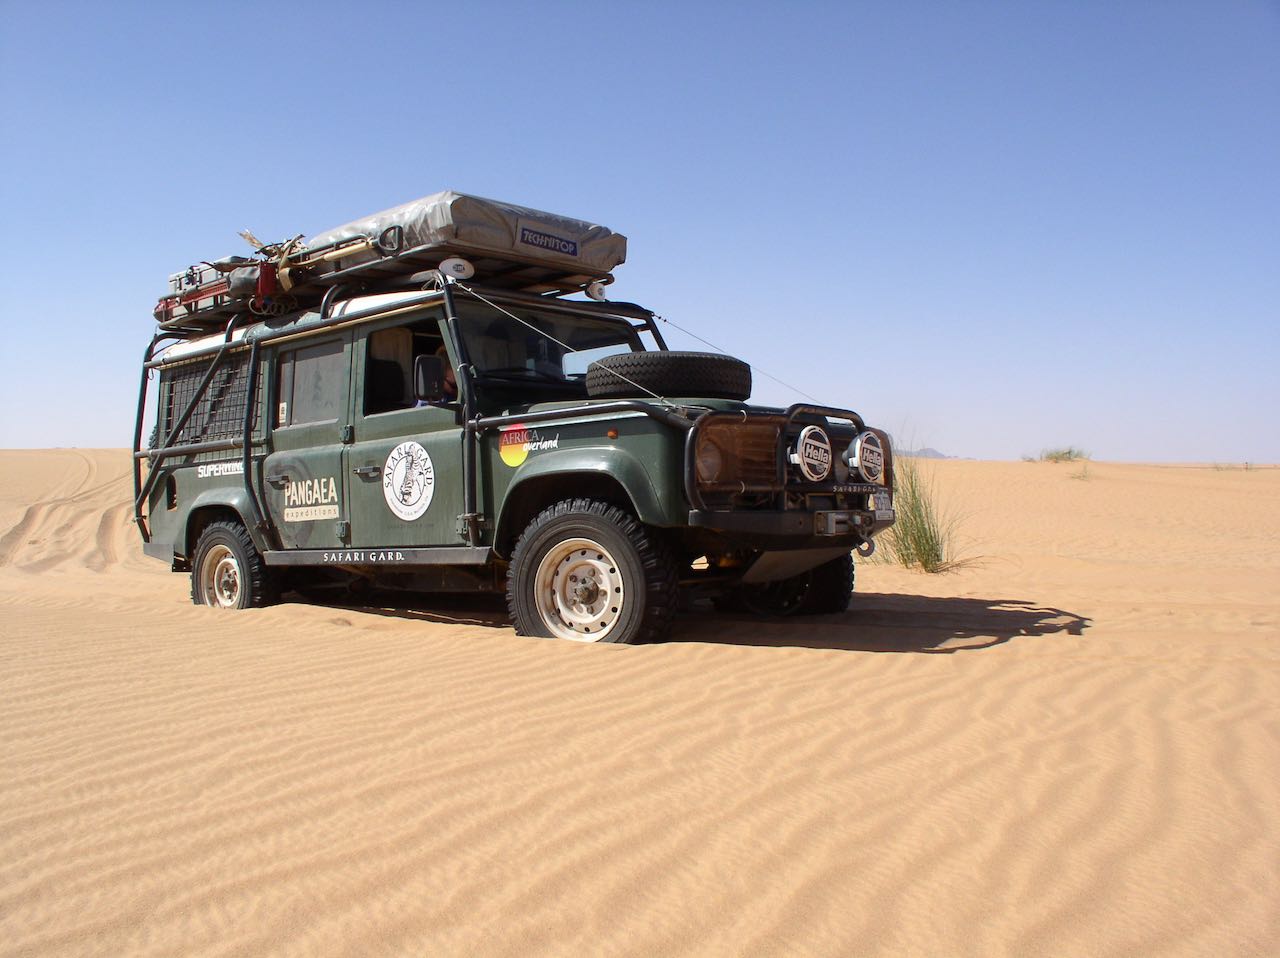 Sand driving in Mauritania. This was probably the one time when we could've put sand ladders to use, but we still got by without having them along.